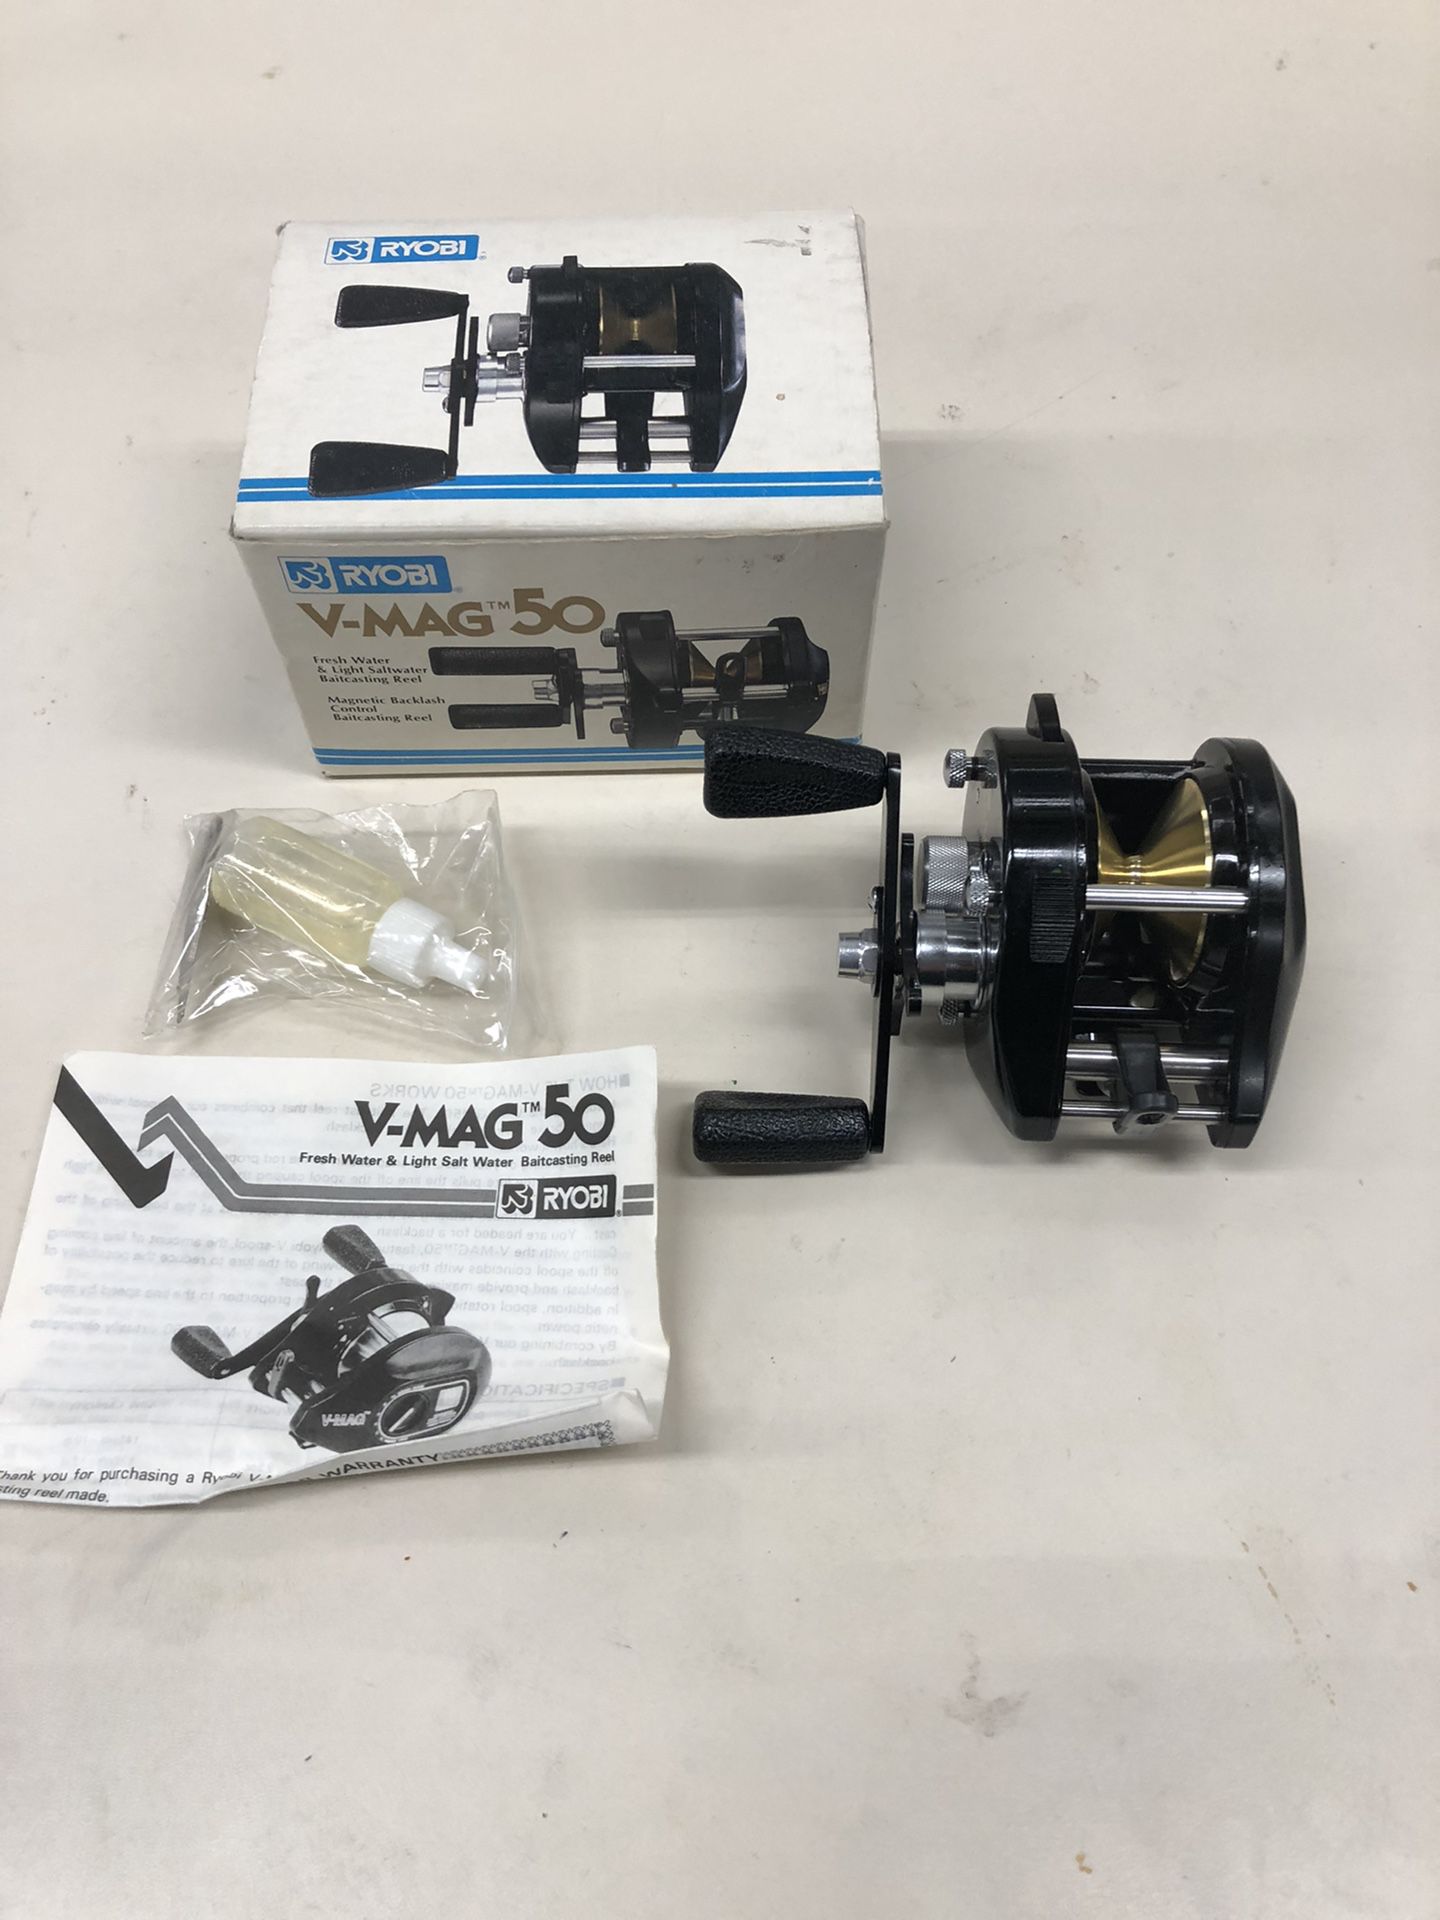 Vintage Ryobi V-Mag 50 Baitcasting Fishing Reel for Sale in Chino Hills, CA  - OfferUp